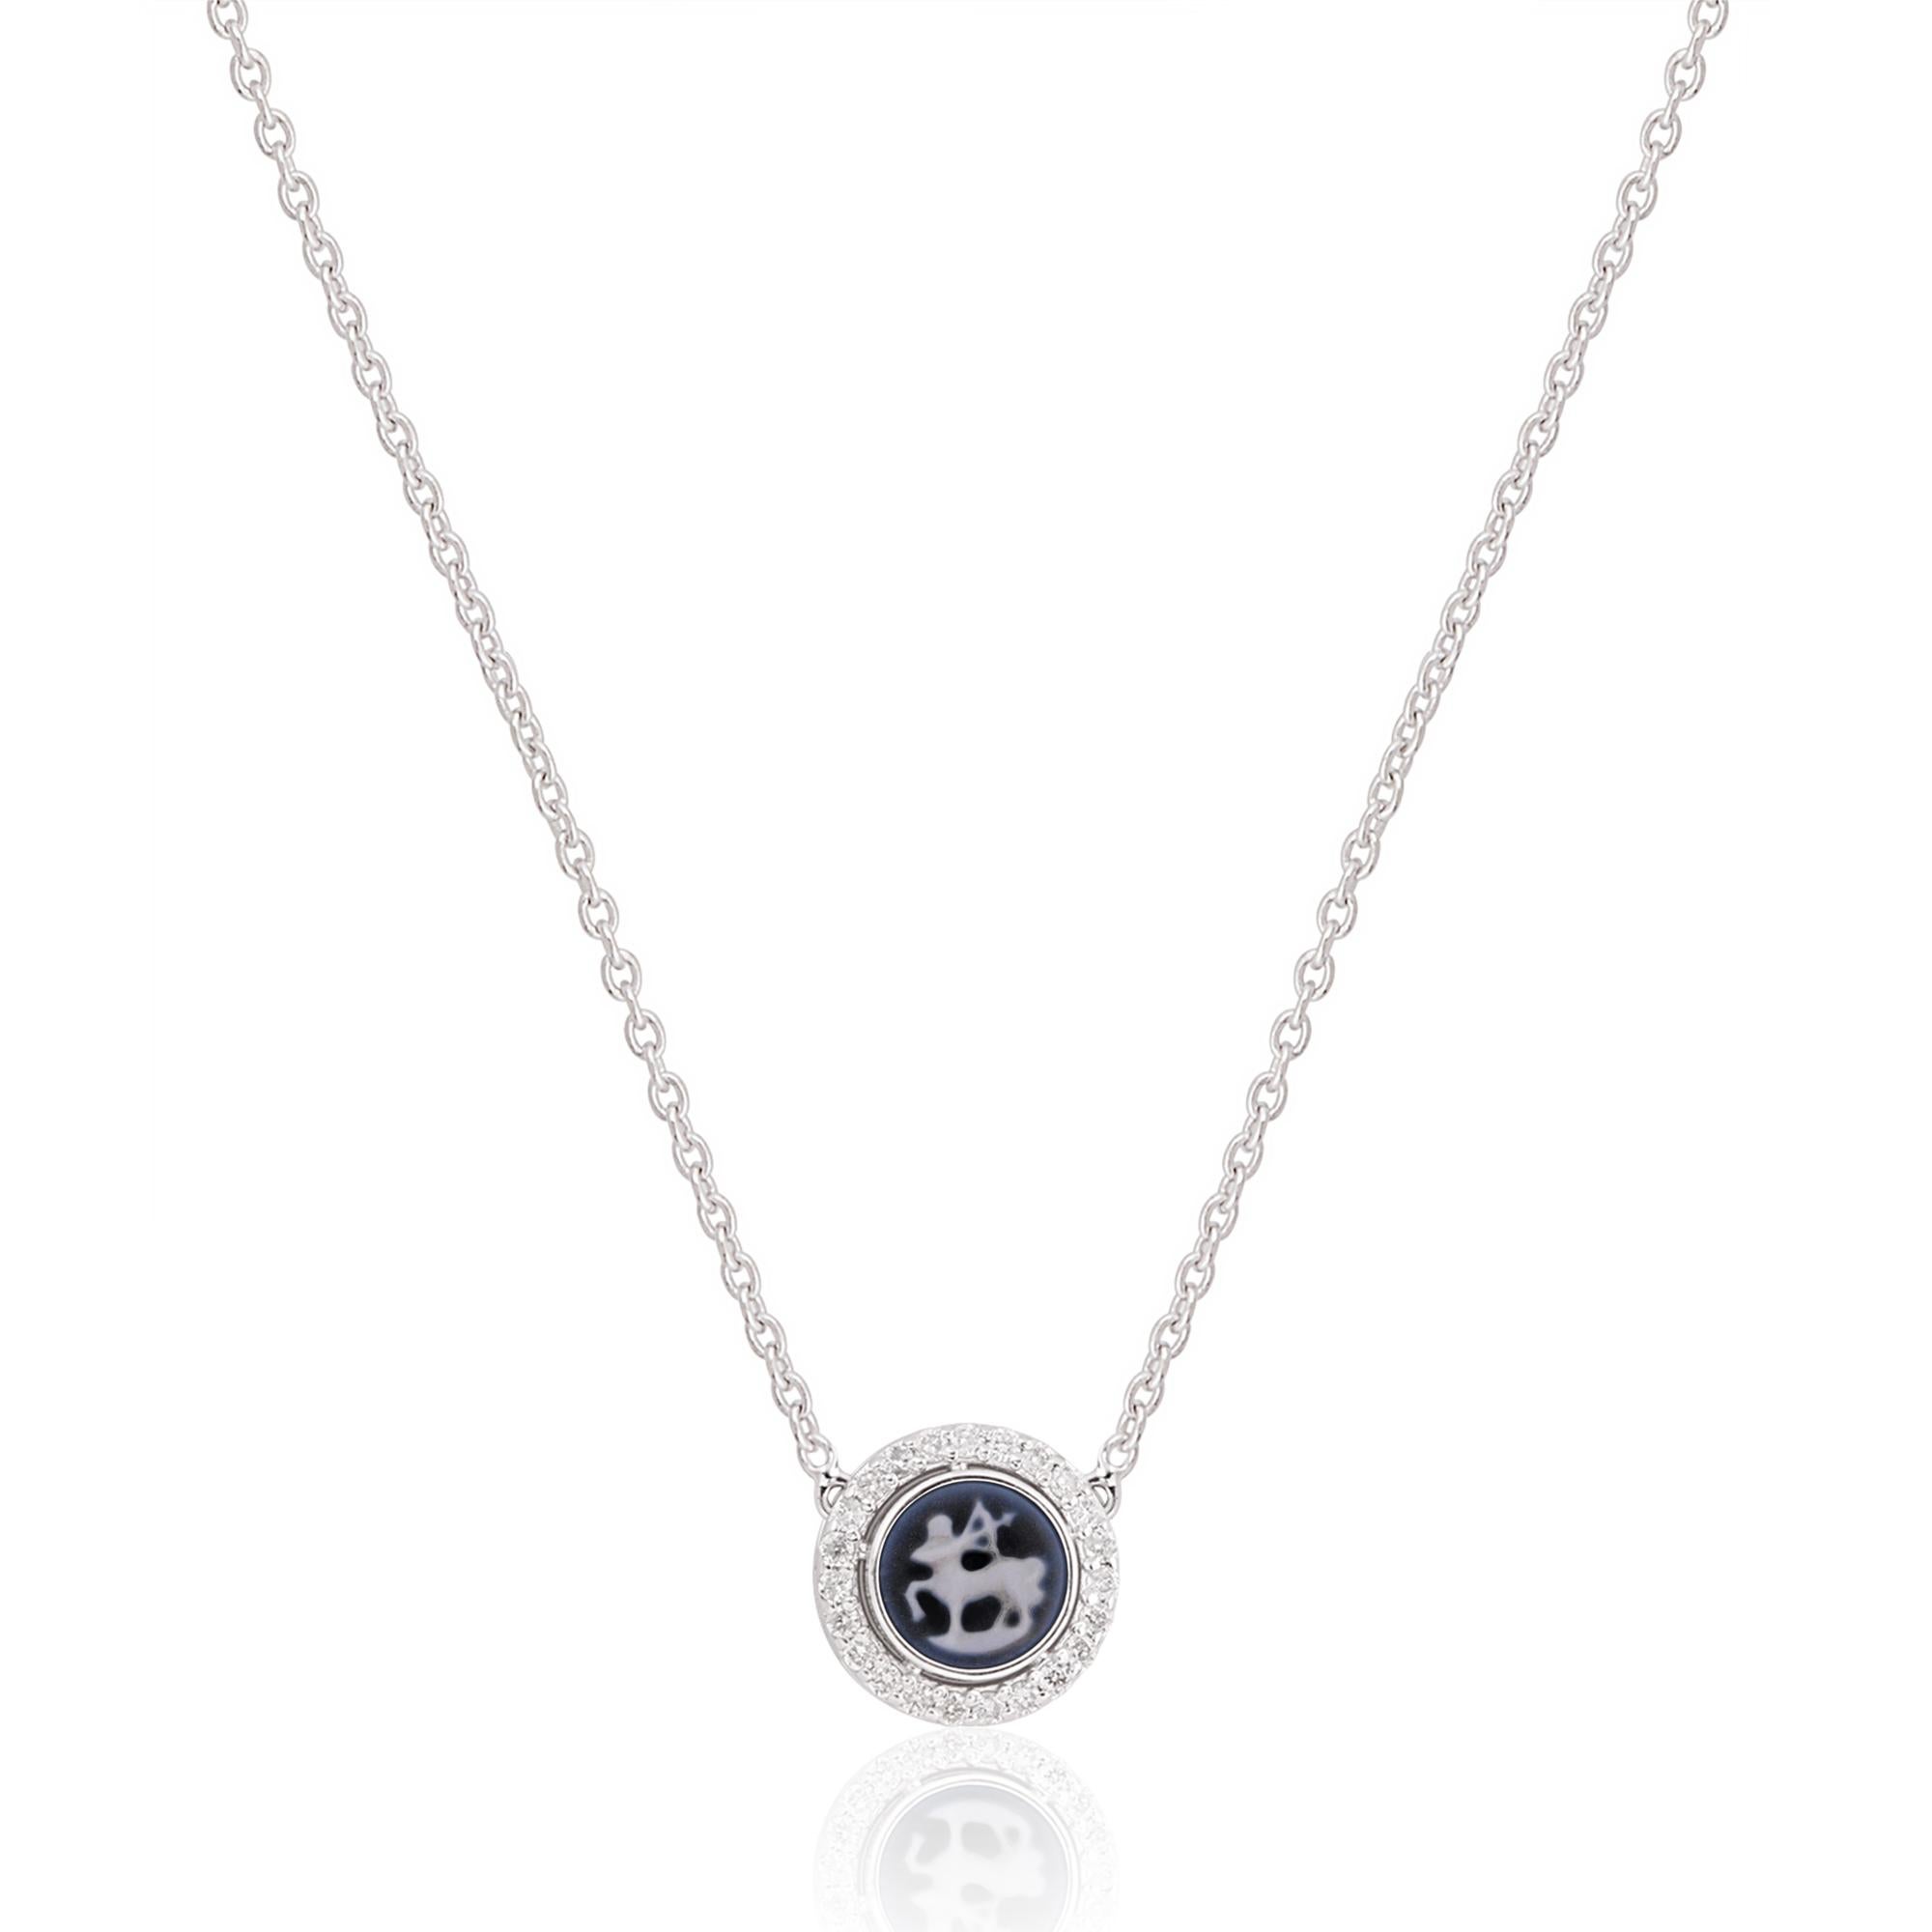 This Sagittarius zodiac pendant necklace is a perfect personal accessory or a thoughtful gift for those born under this sign. It celebrates individuality, adventure, and the spirit of exploration, making it a cherished piece of jewelry that